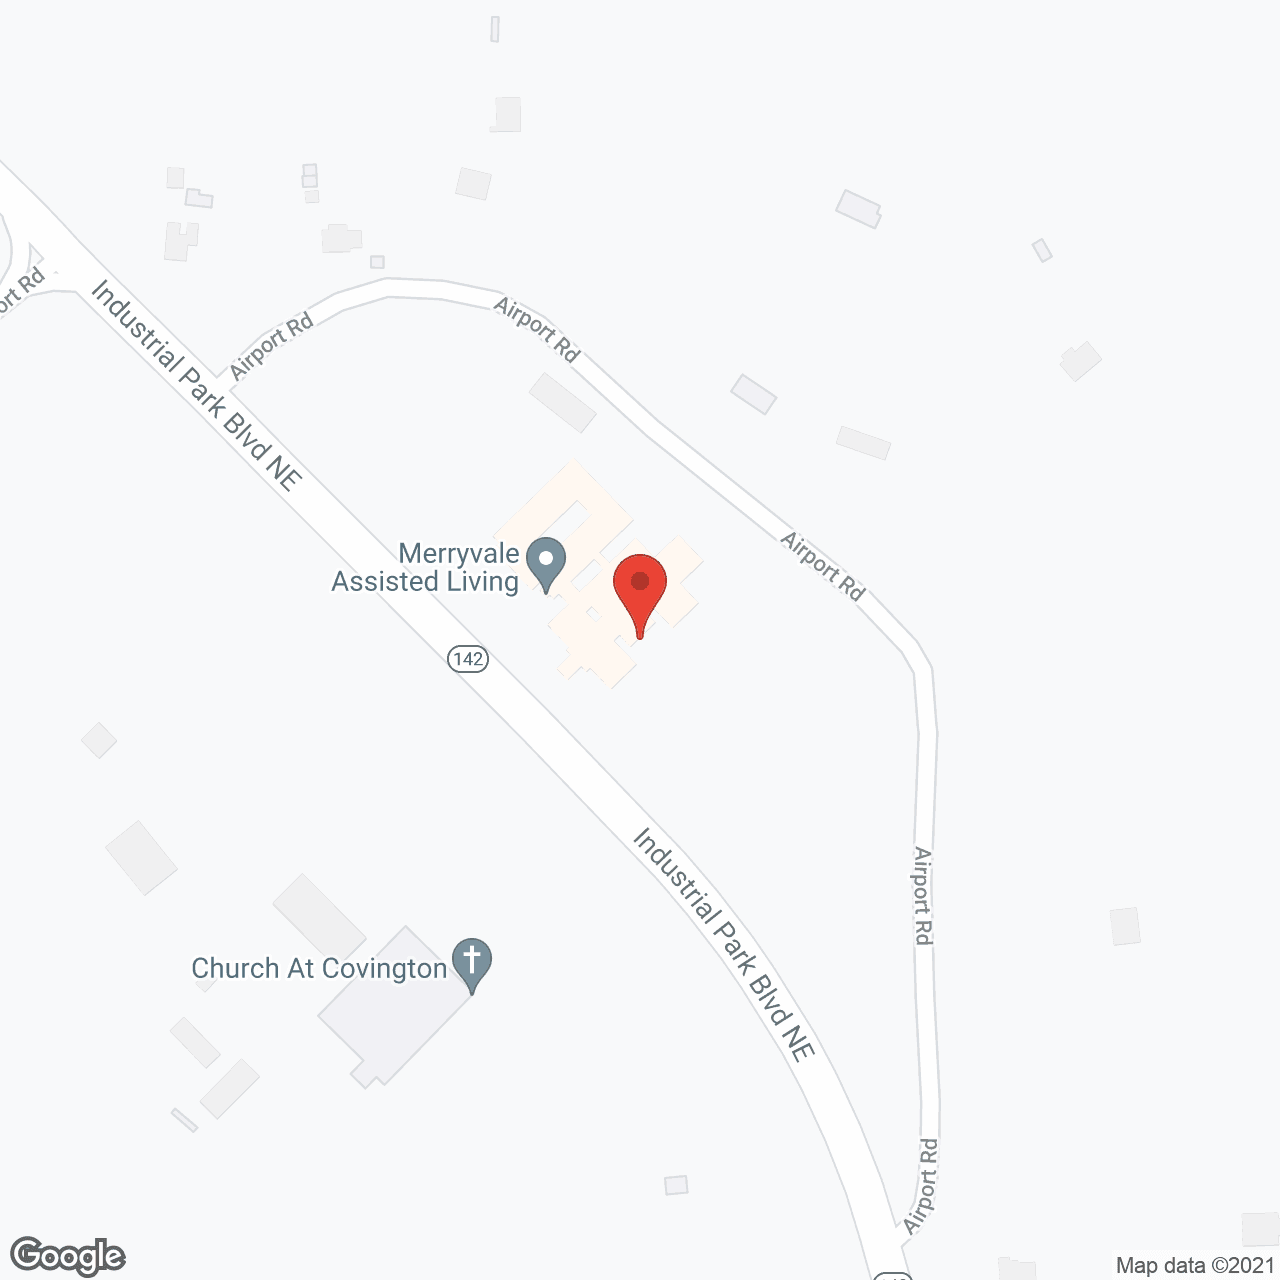 Merryvale Assisted Living in google map